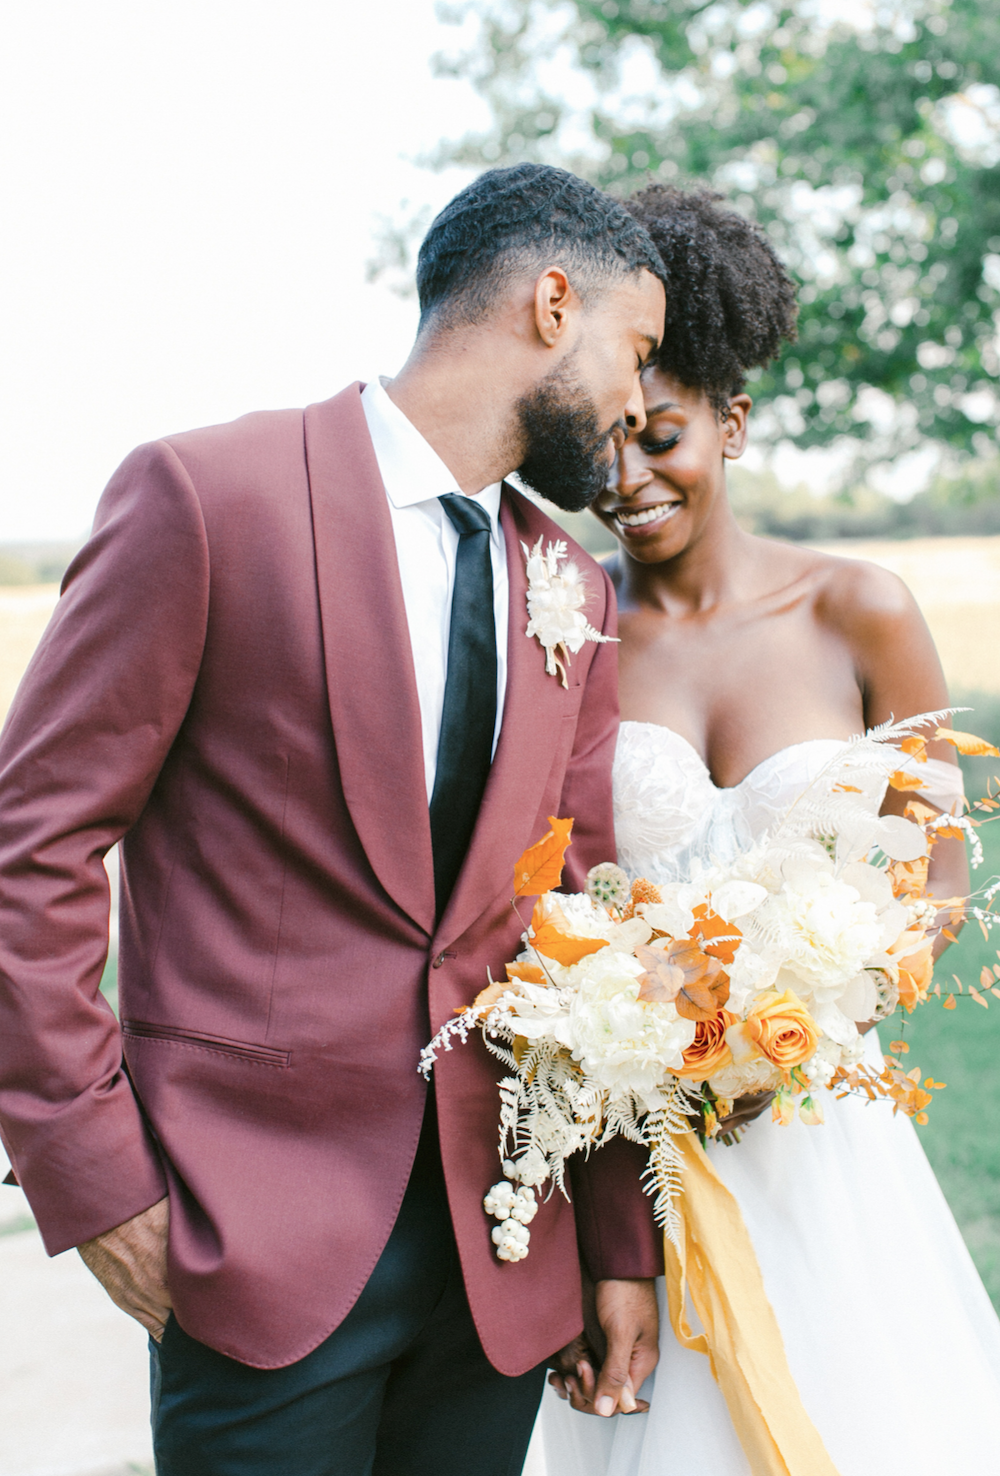 Bride holding bouquet and groom in maroon suit embracing.